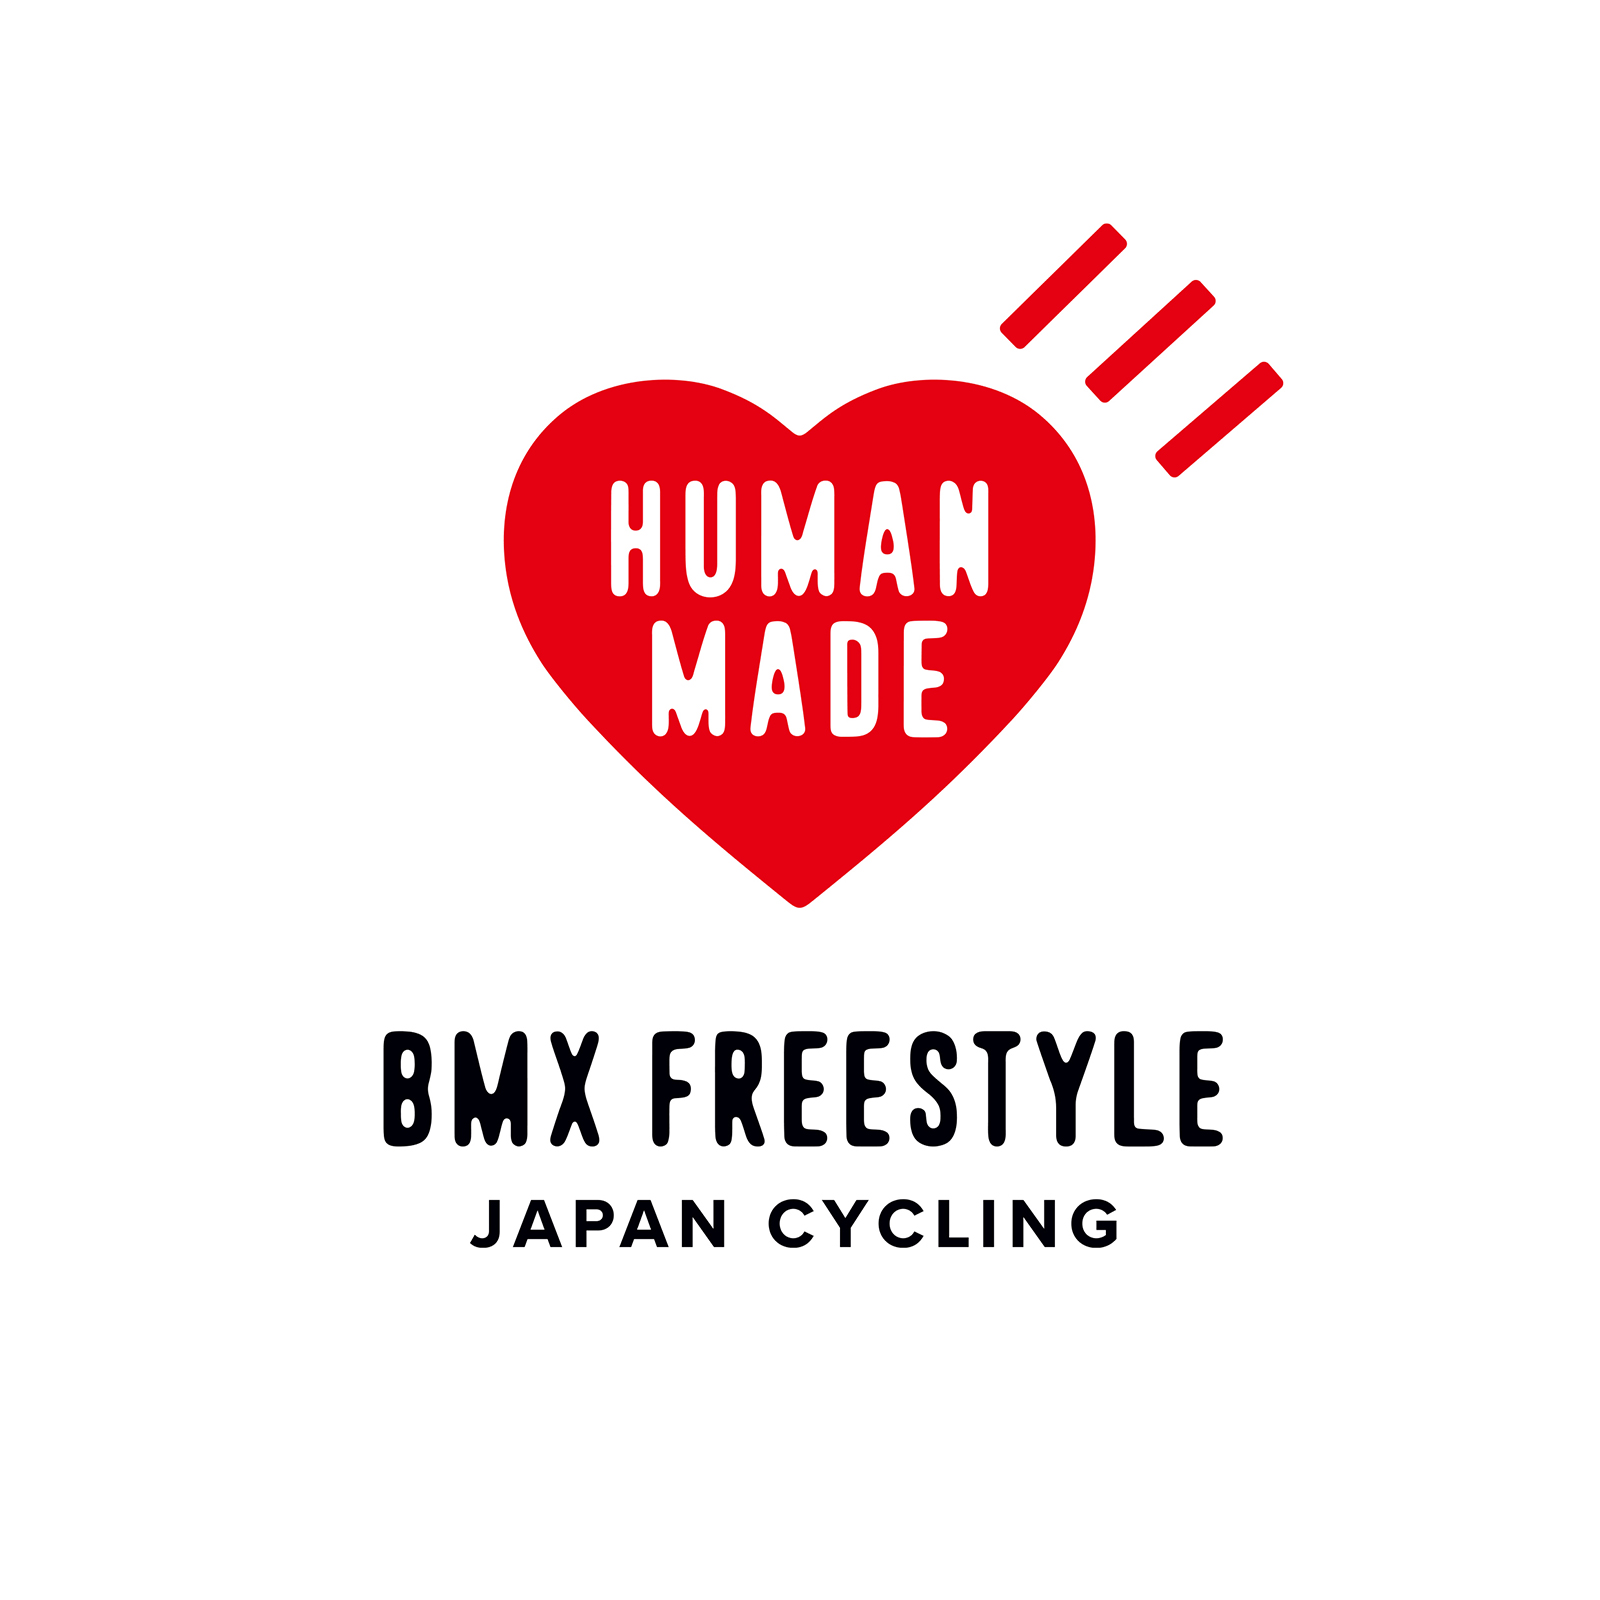 HUMAN MADE is the official supporter of BMX freestyle riders representing Japan